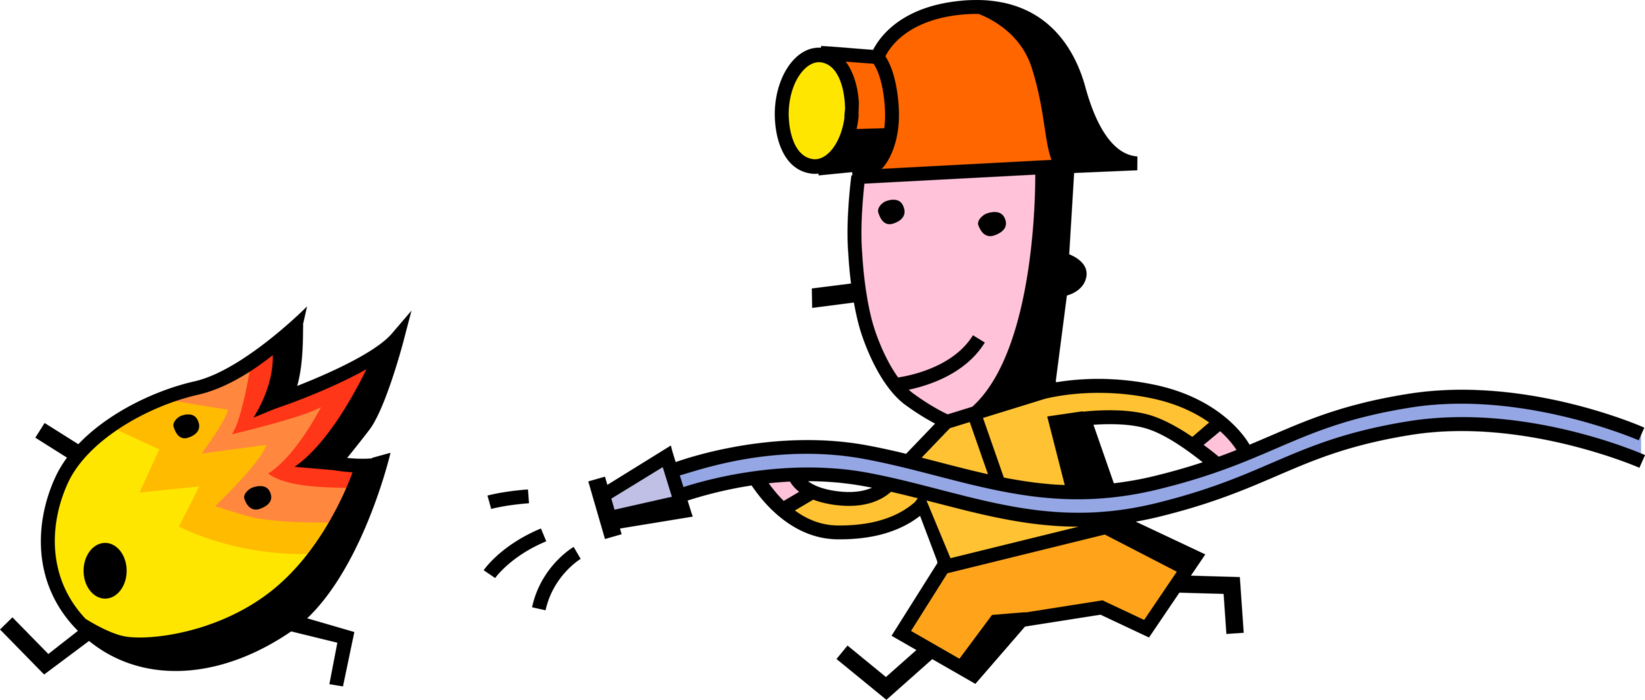 Vector Illustration of Firefighter Fireman Fights Runaway Fire Flames with Firehose and Water